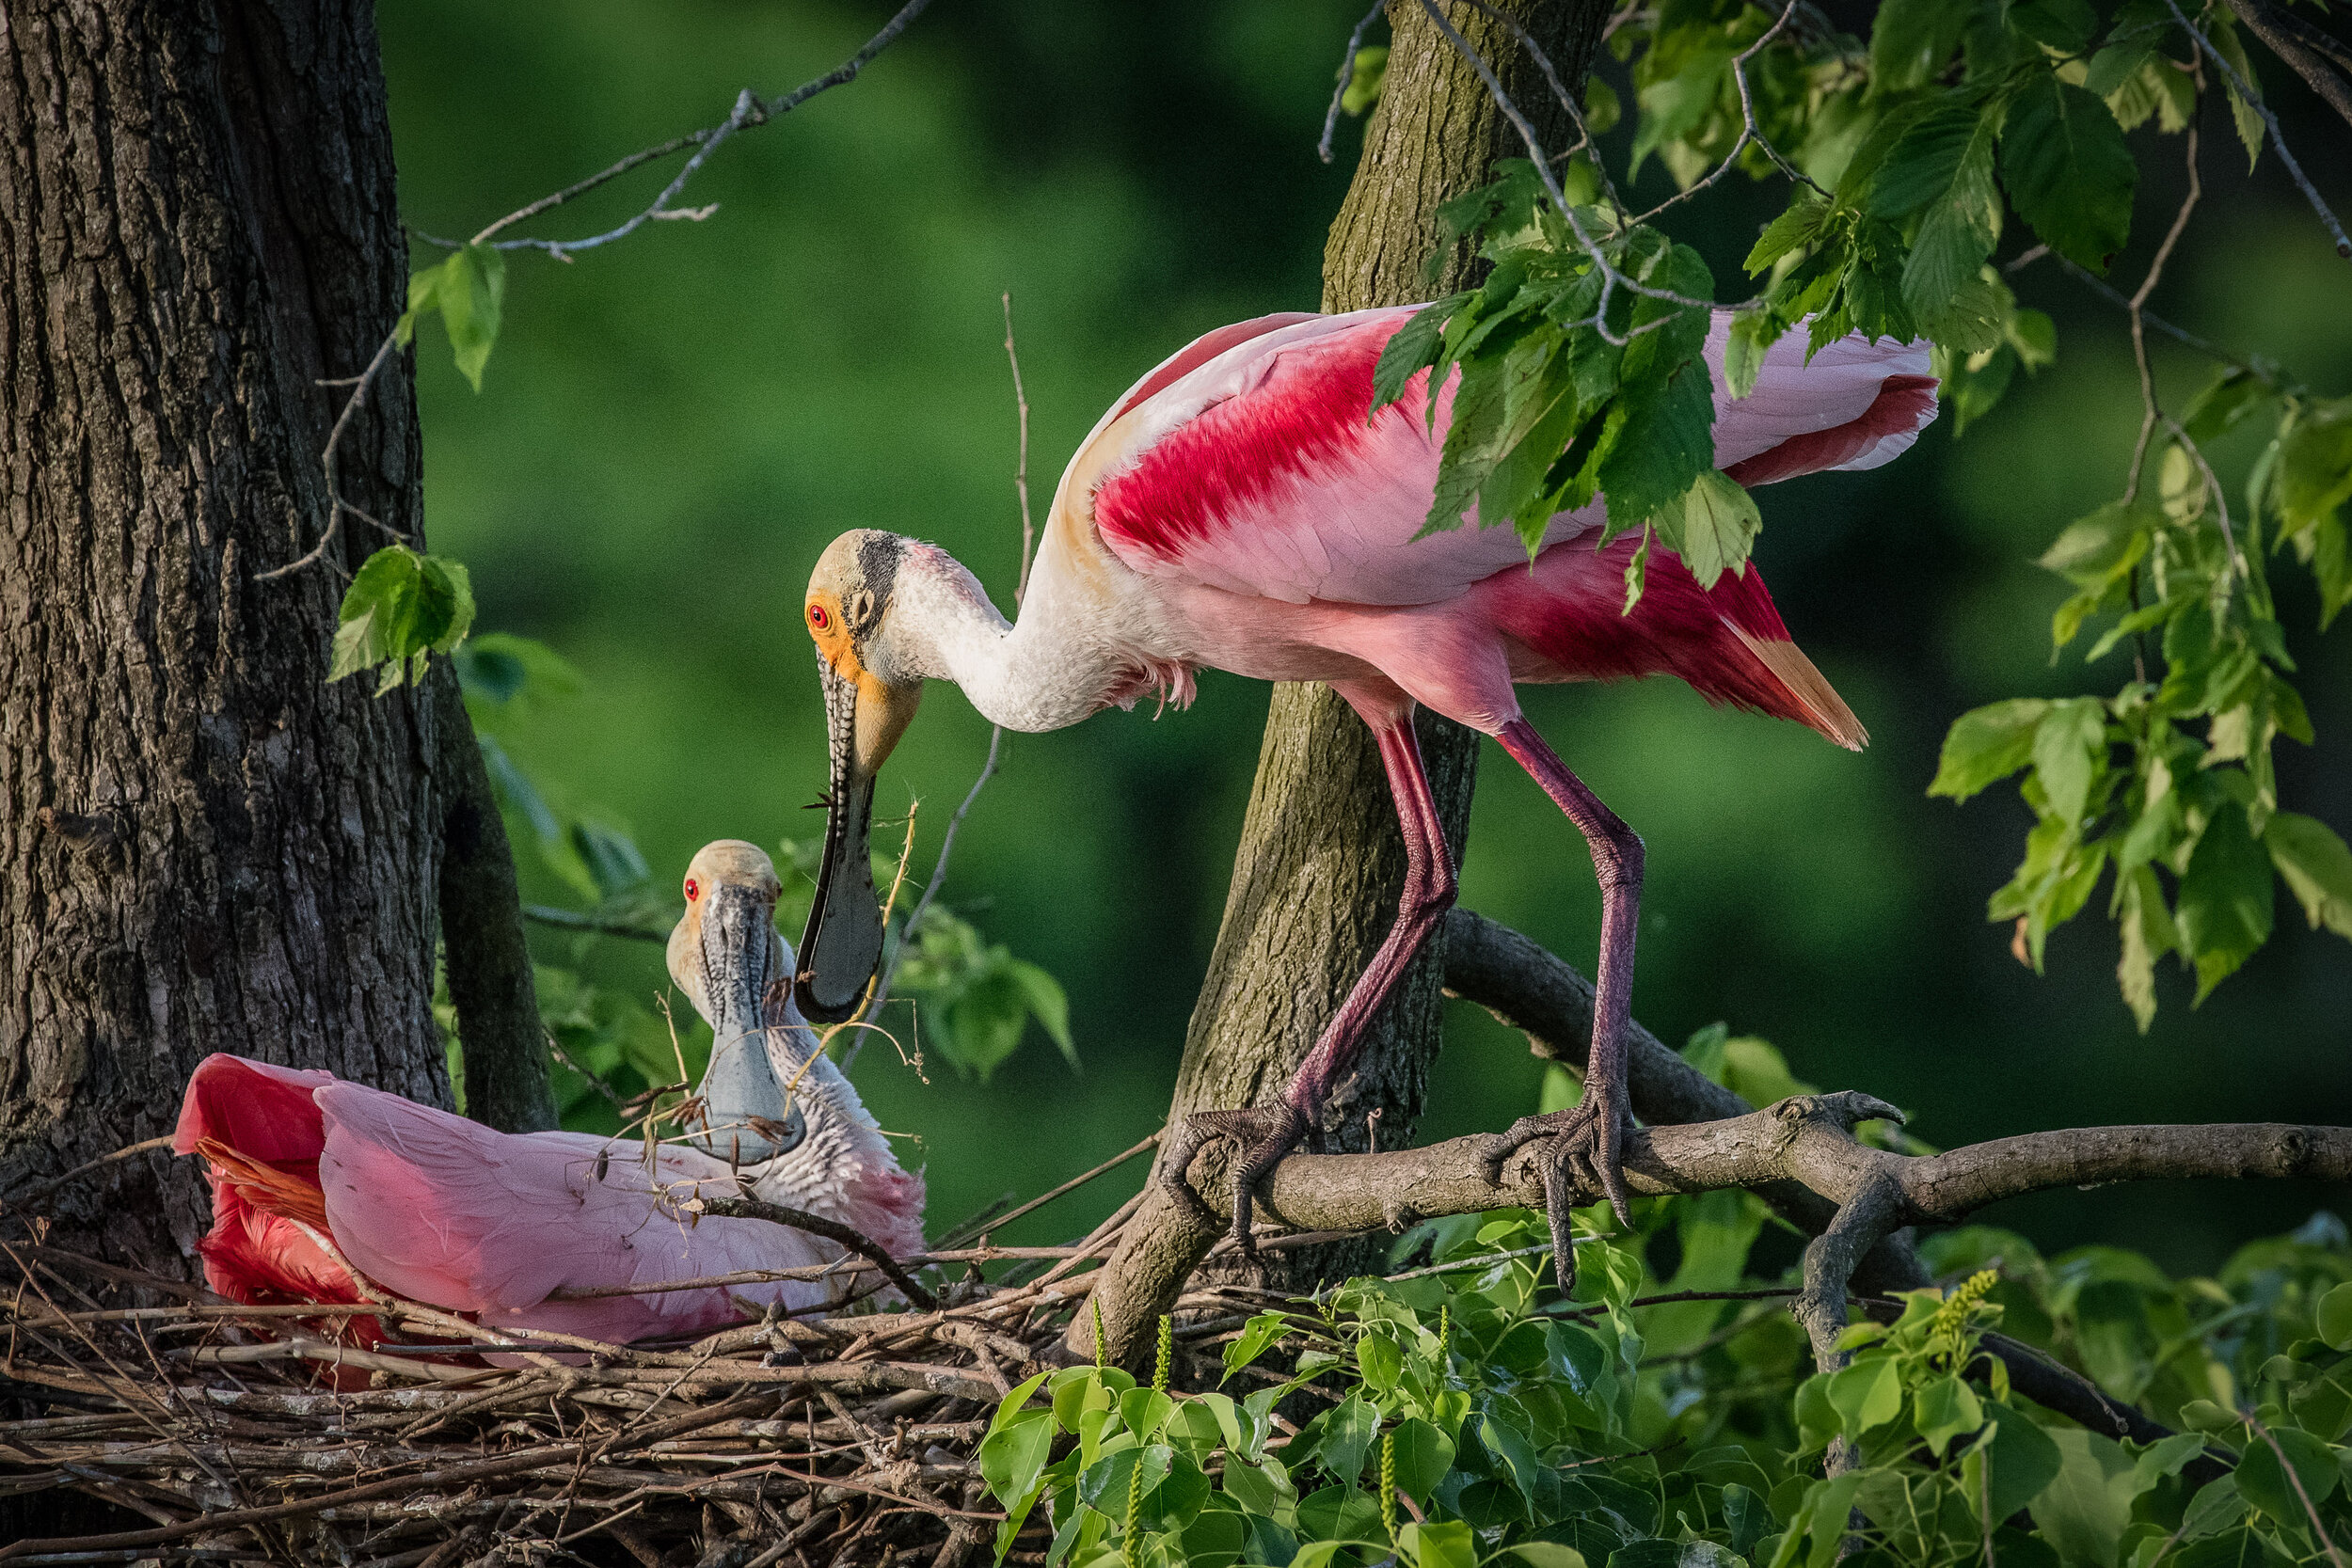 Male Roseate Spoonbill presenting a stick to the female on the nest